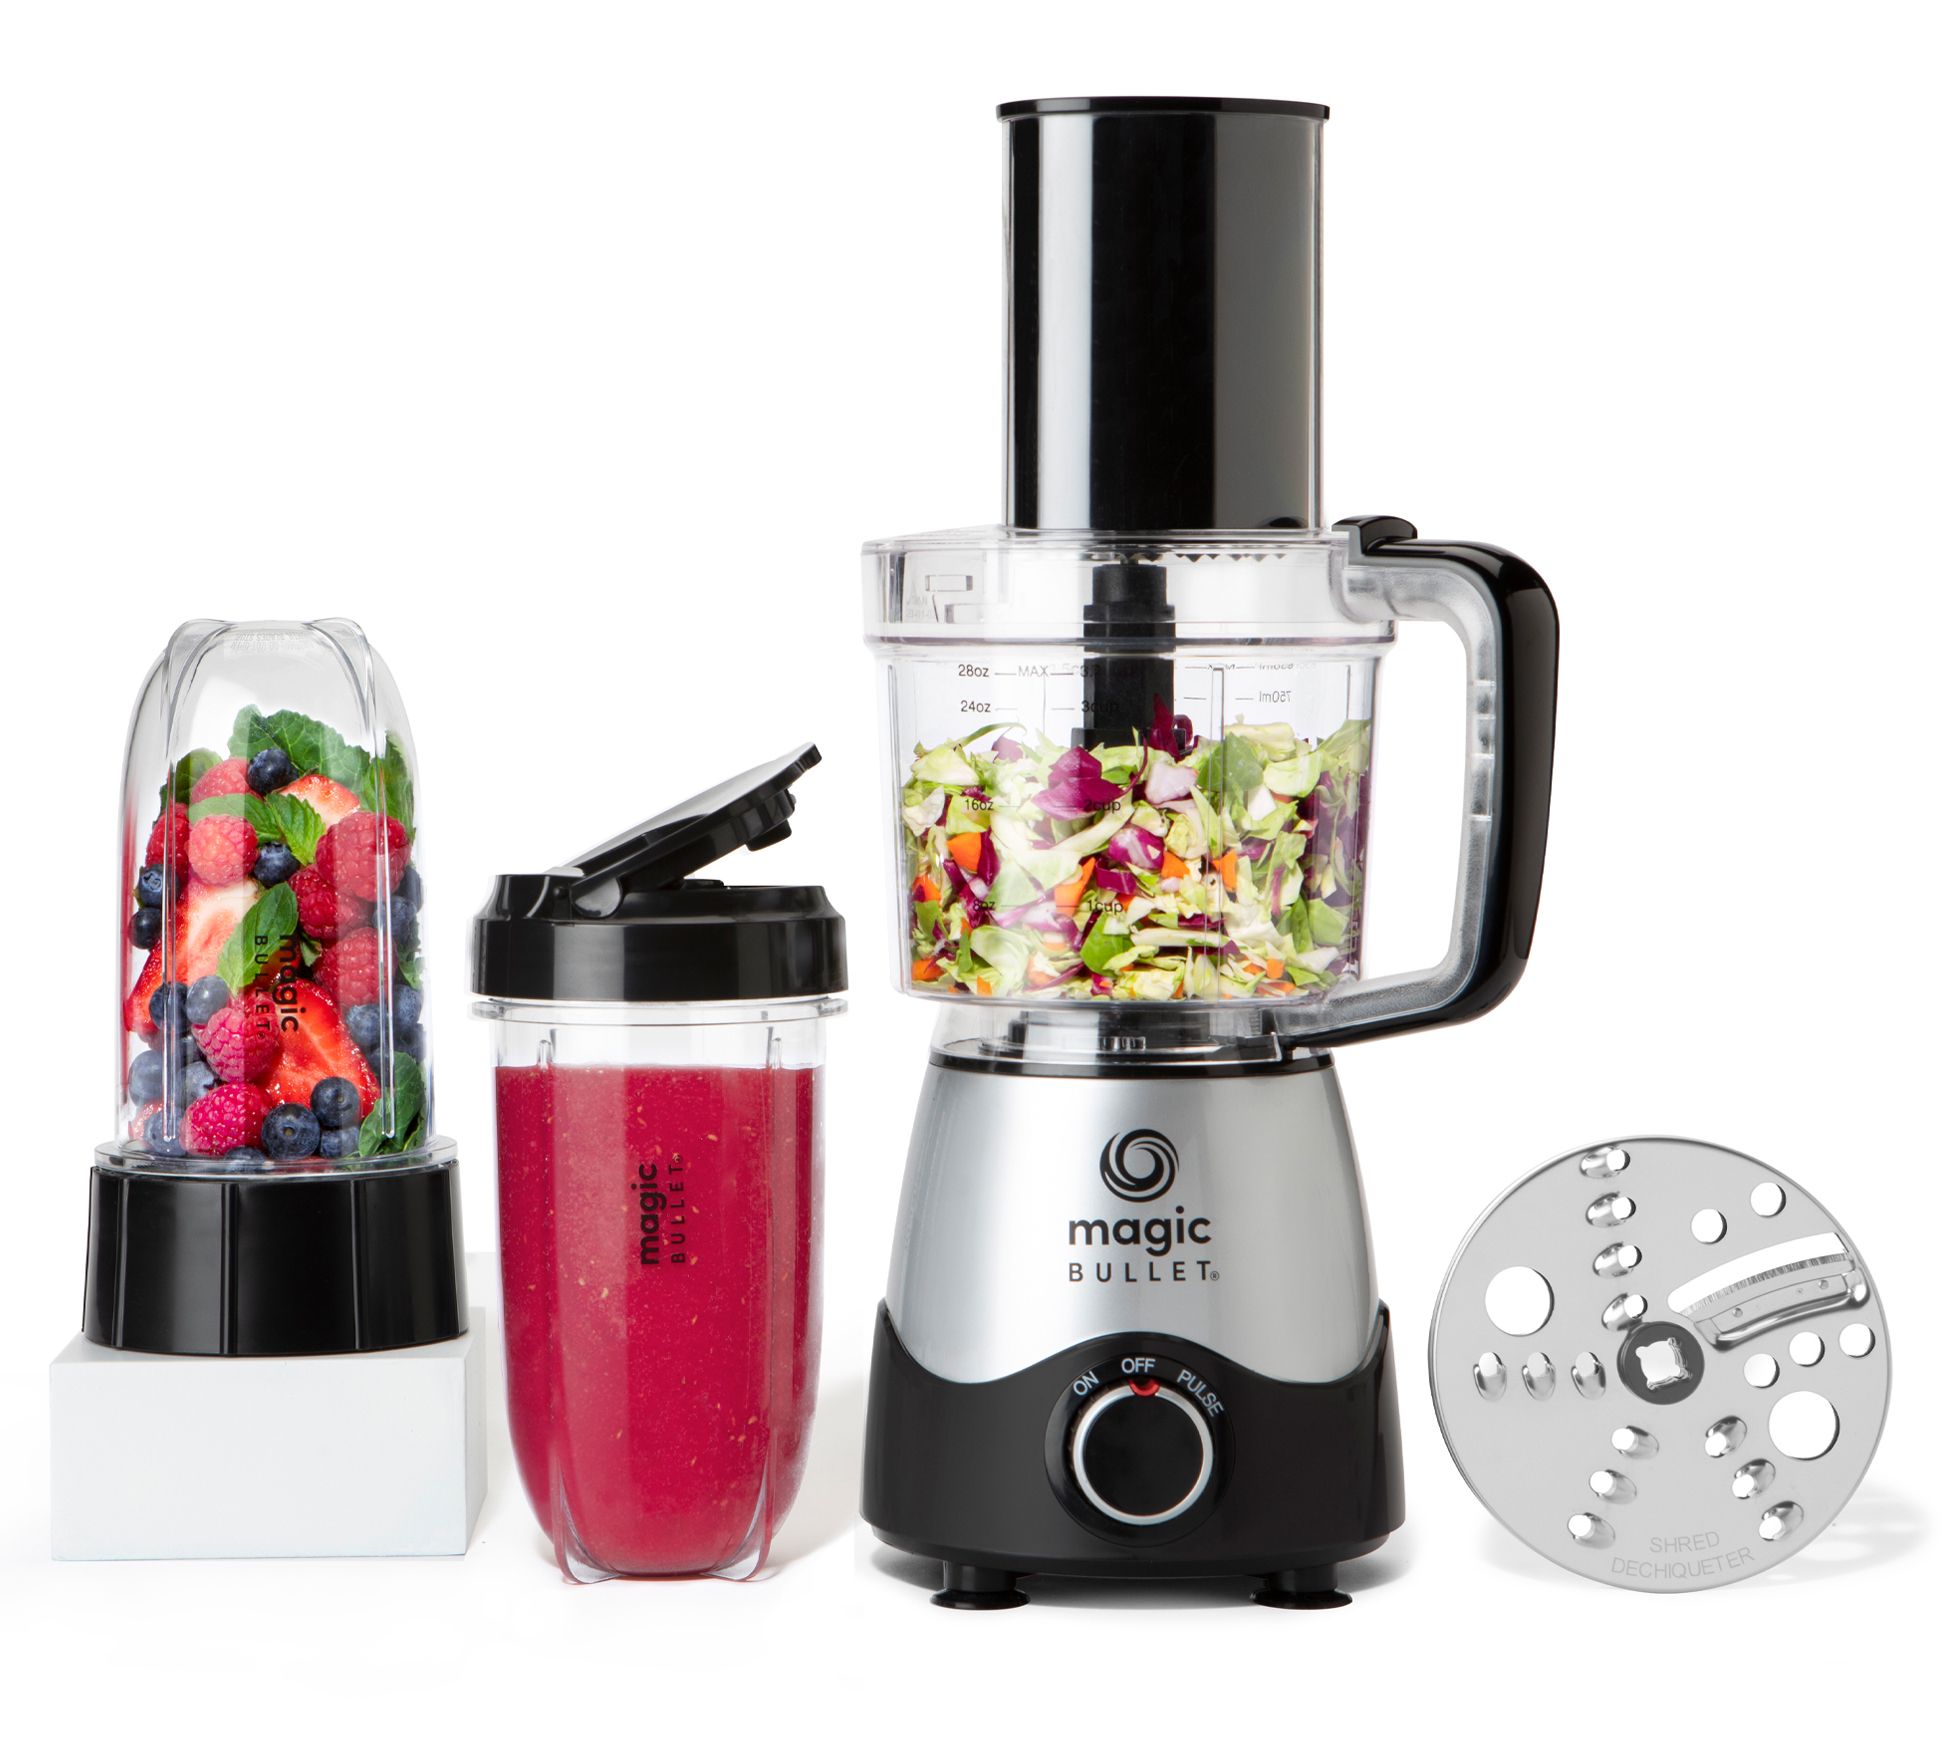 NutriBullet Bullet with Feed QVC.com